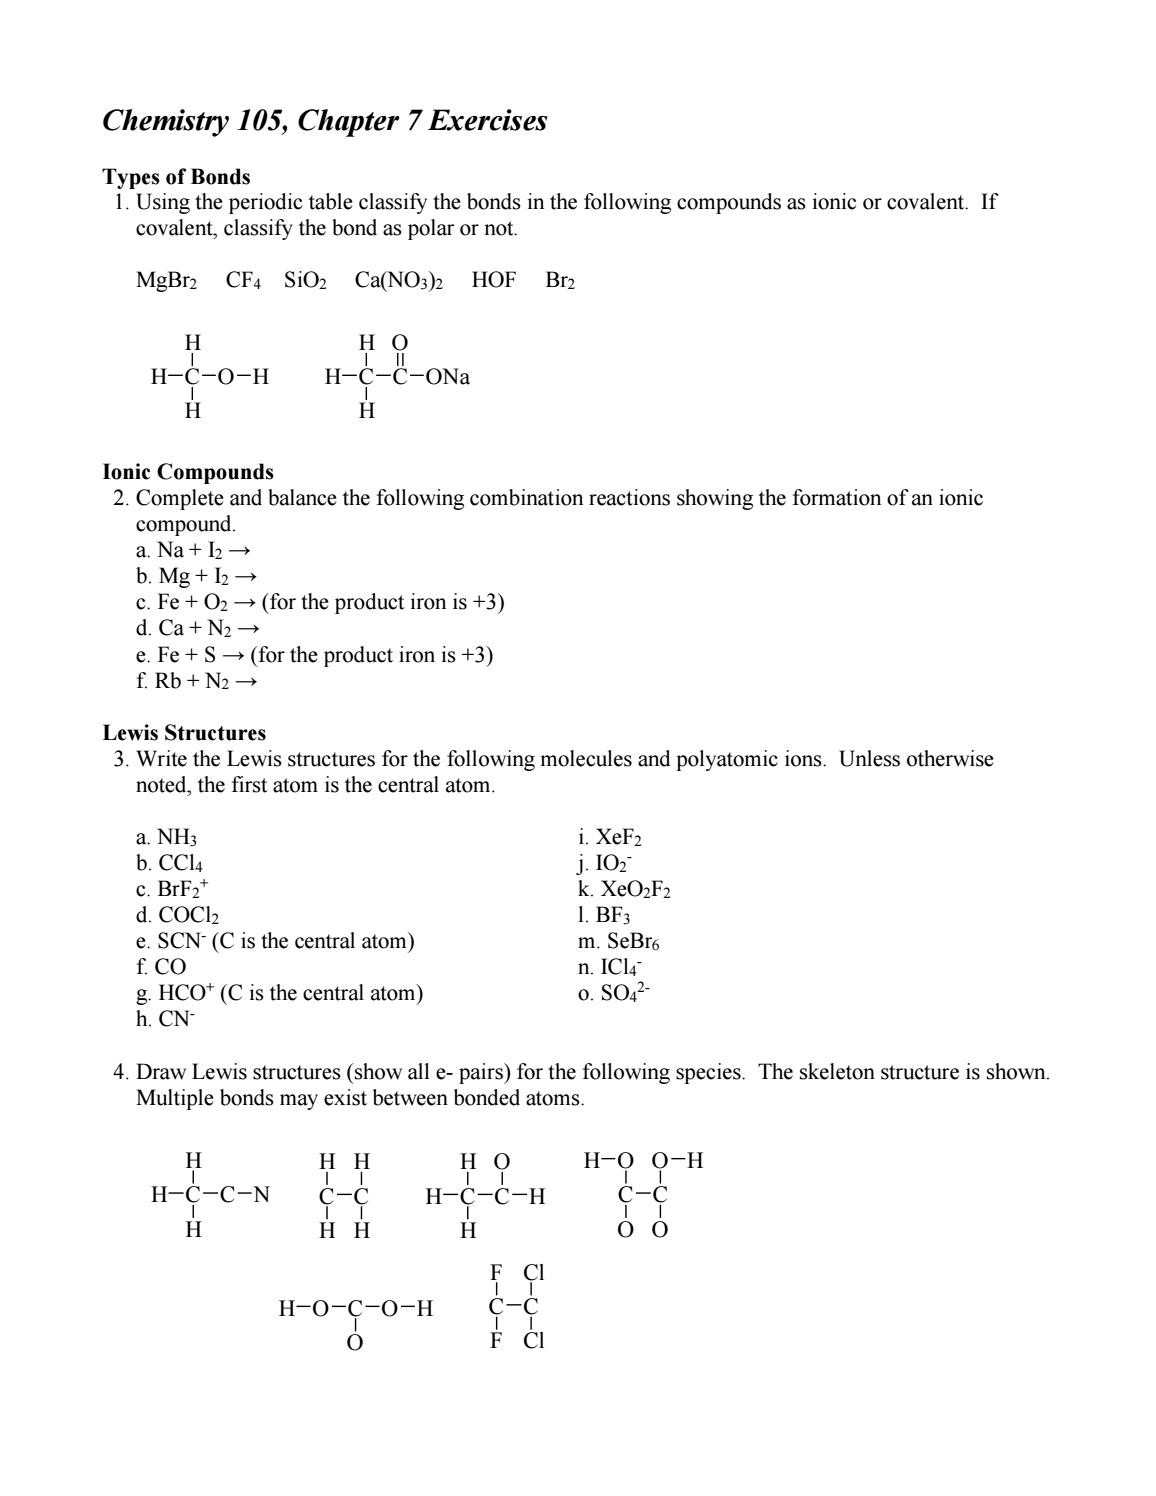 Lewis Structure Worksheet with Answers Lewis Structures &amp; Bonding Worksheet by Olivia Hunter issuu